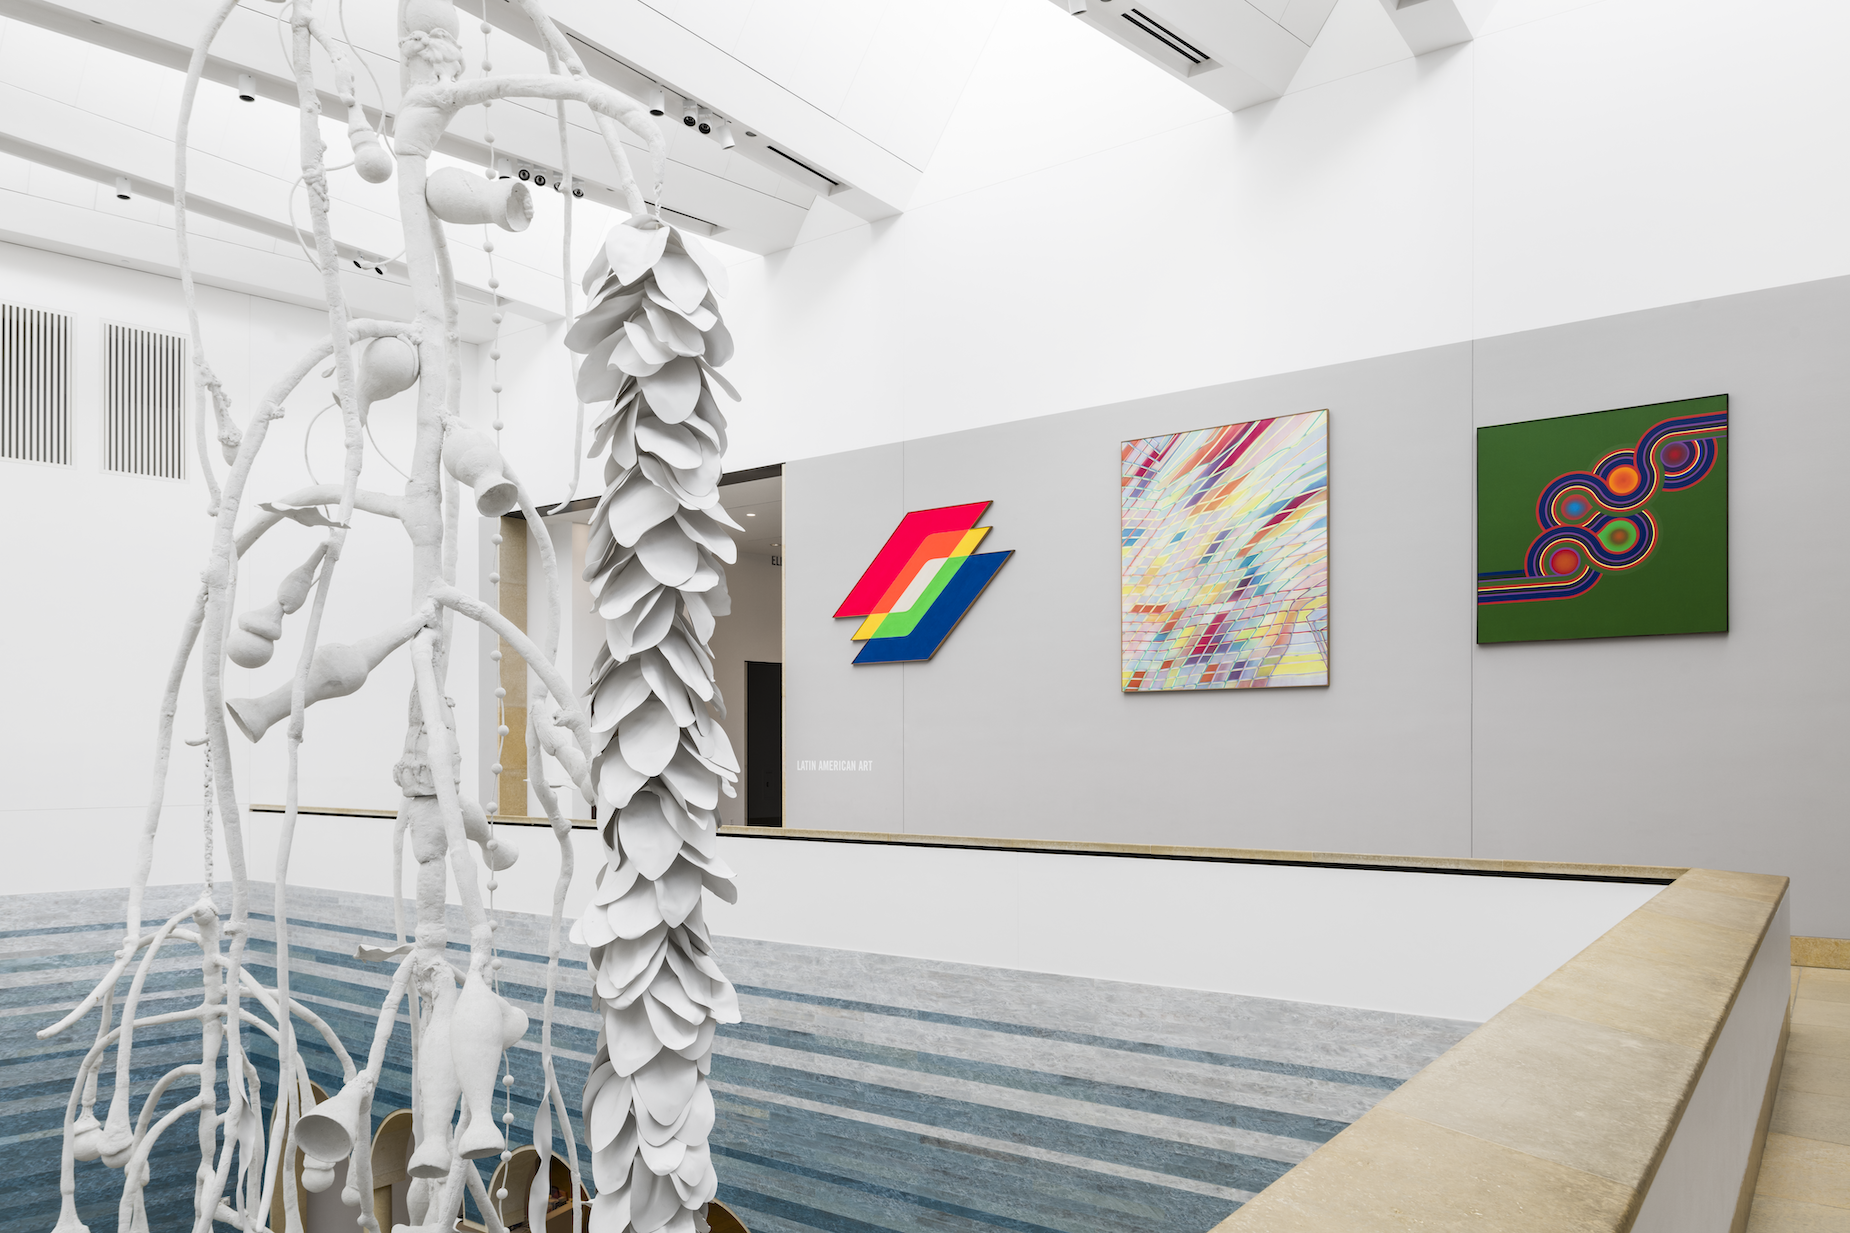 The mezzanine of a museum with 3 large abstract works on the wall in the background. In the foreground is a large, dangling white sculpture with oceanic qualities. It hangs over the atrium which is covered with gradient blue-colored tiles